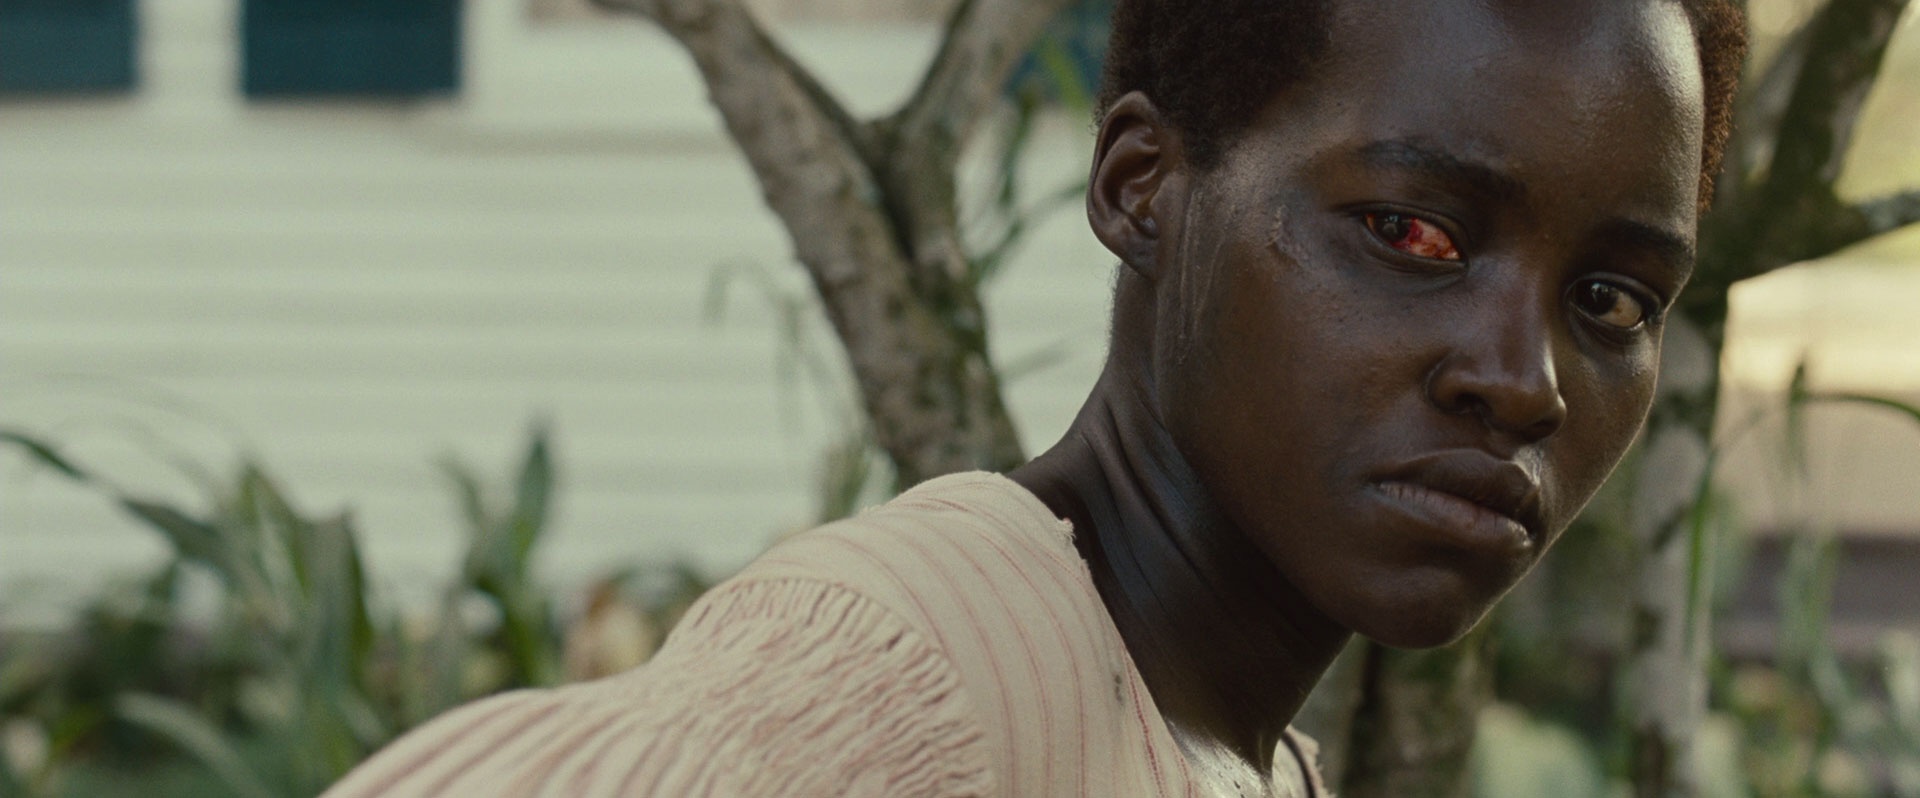 Galerie 12 Years a Slave 3